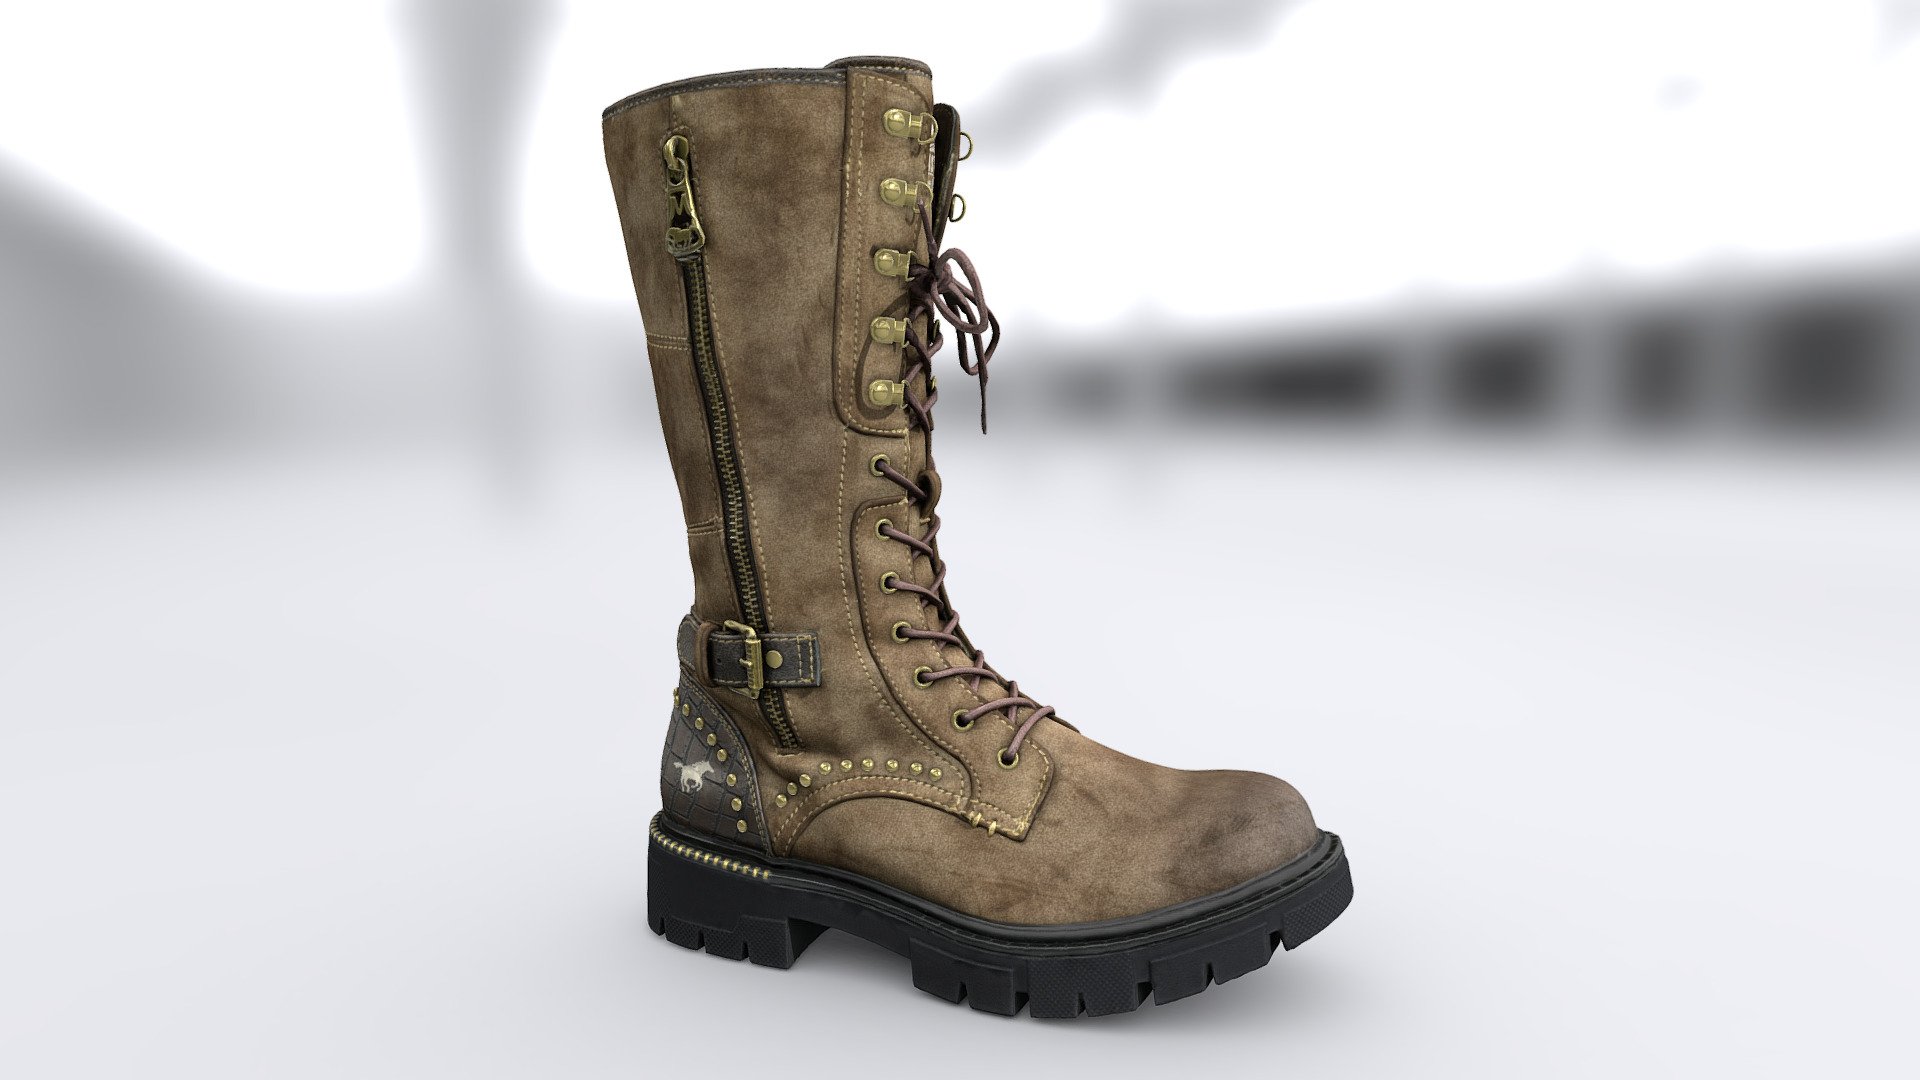 Realistic high detailed High boot model with high resolution textures. Model created by our unique semi-automatic scanning technology

Optimized for 3D web and AR / VR

=======FEATURES===========

The units of measurement during the creation process were milimeters.
Clean and optimized topology is used for maximum polygon efficiency.
This model consists of one mesh.
All objects have fully unwrapped UVs
The model have 1 material
The metal parts were remodeled.

Includes 4096x4096 textures (diffuse (base color), Roughness, Metallness, Normal, Occlusion). 90k polygons

================== - Mustang Platform High shoe - Buy Royalty Free 3D model by VRModelFactory 3d model